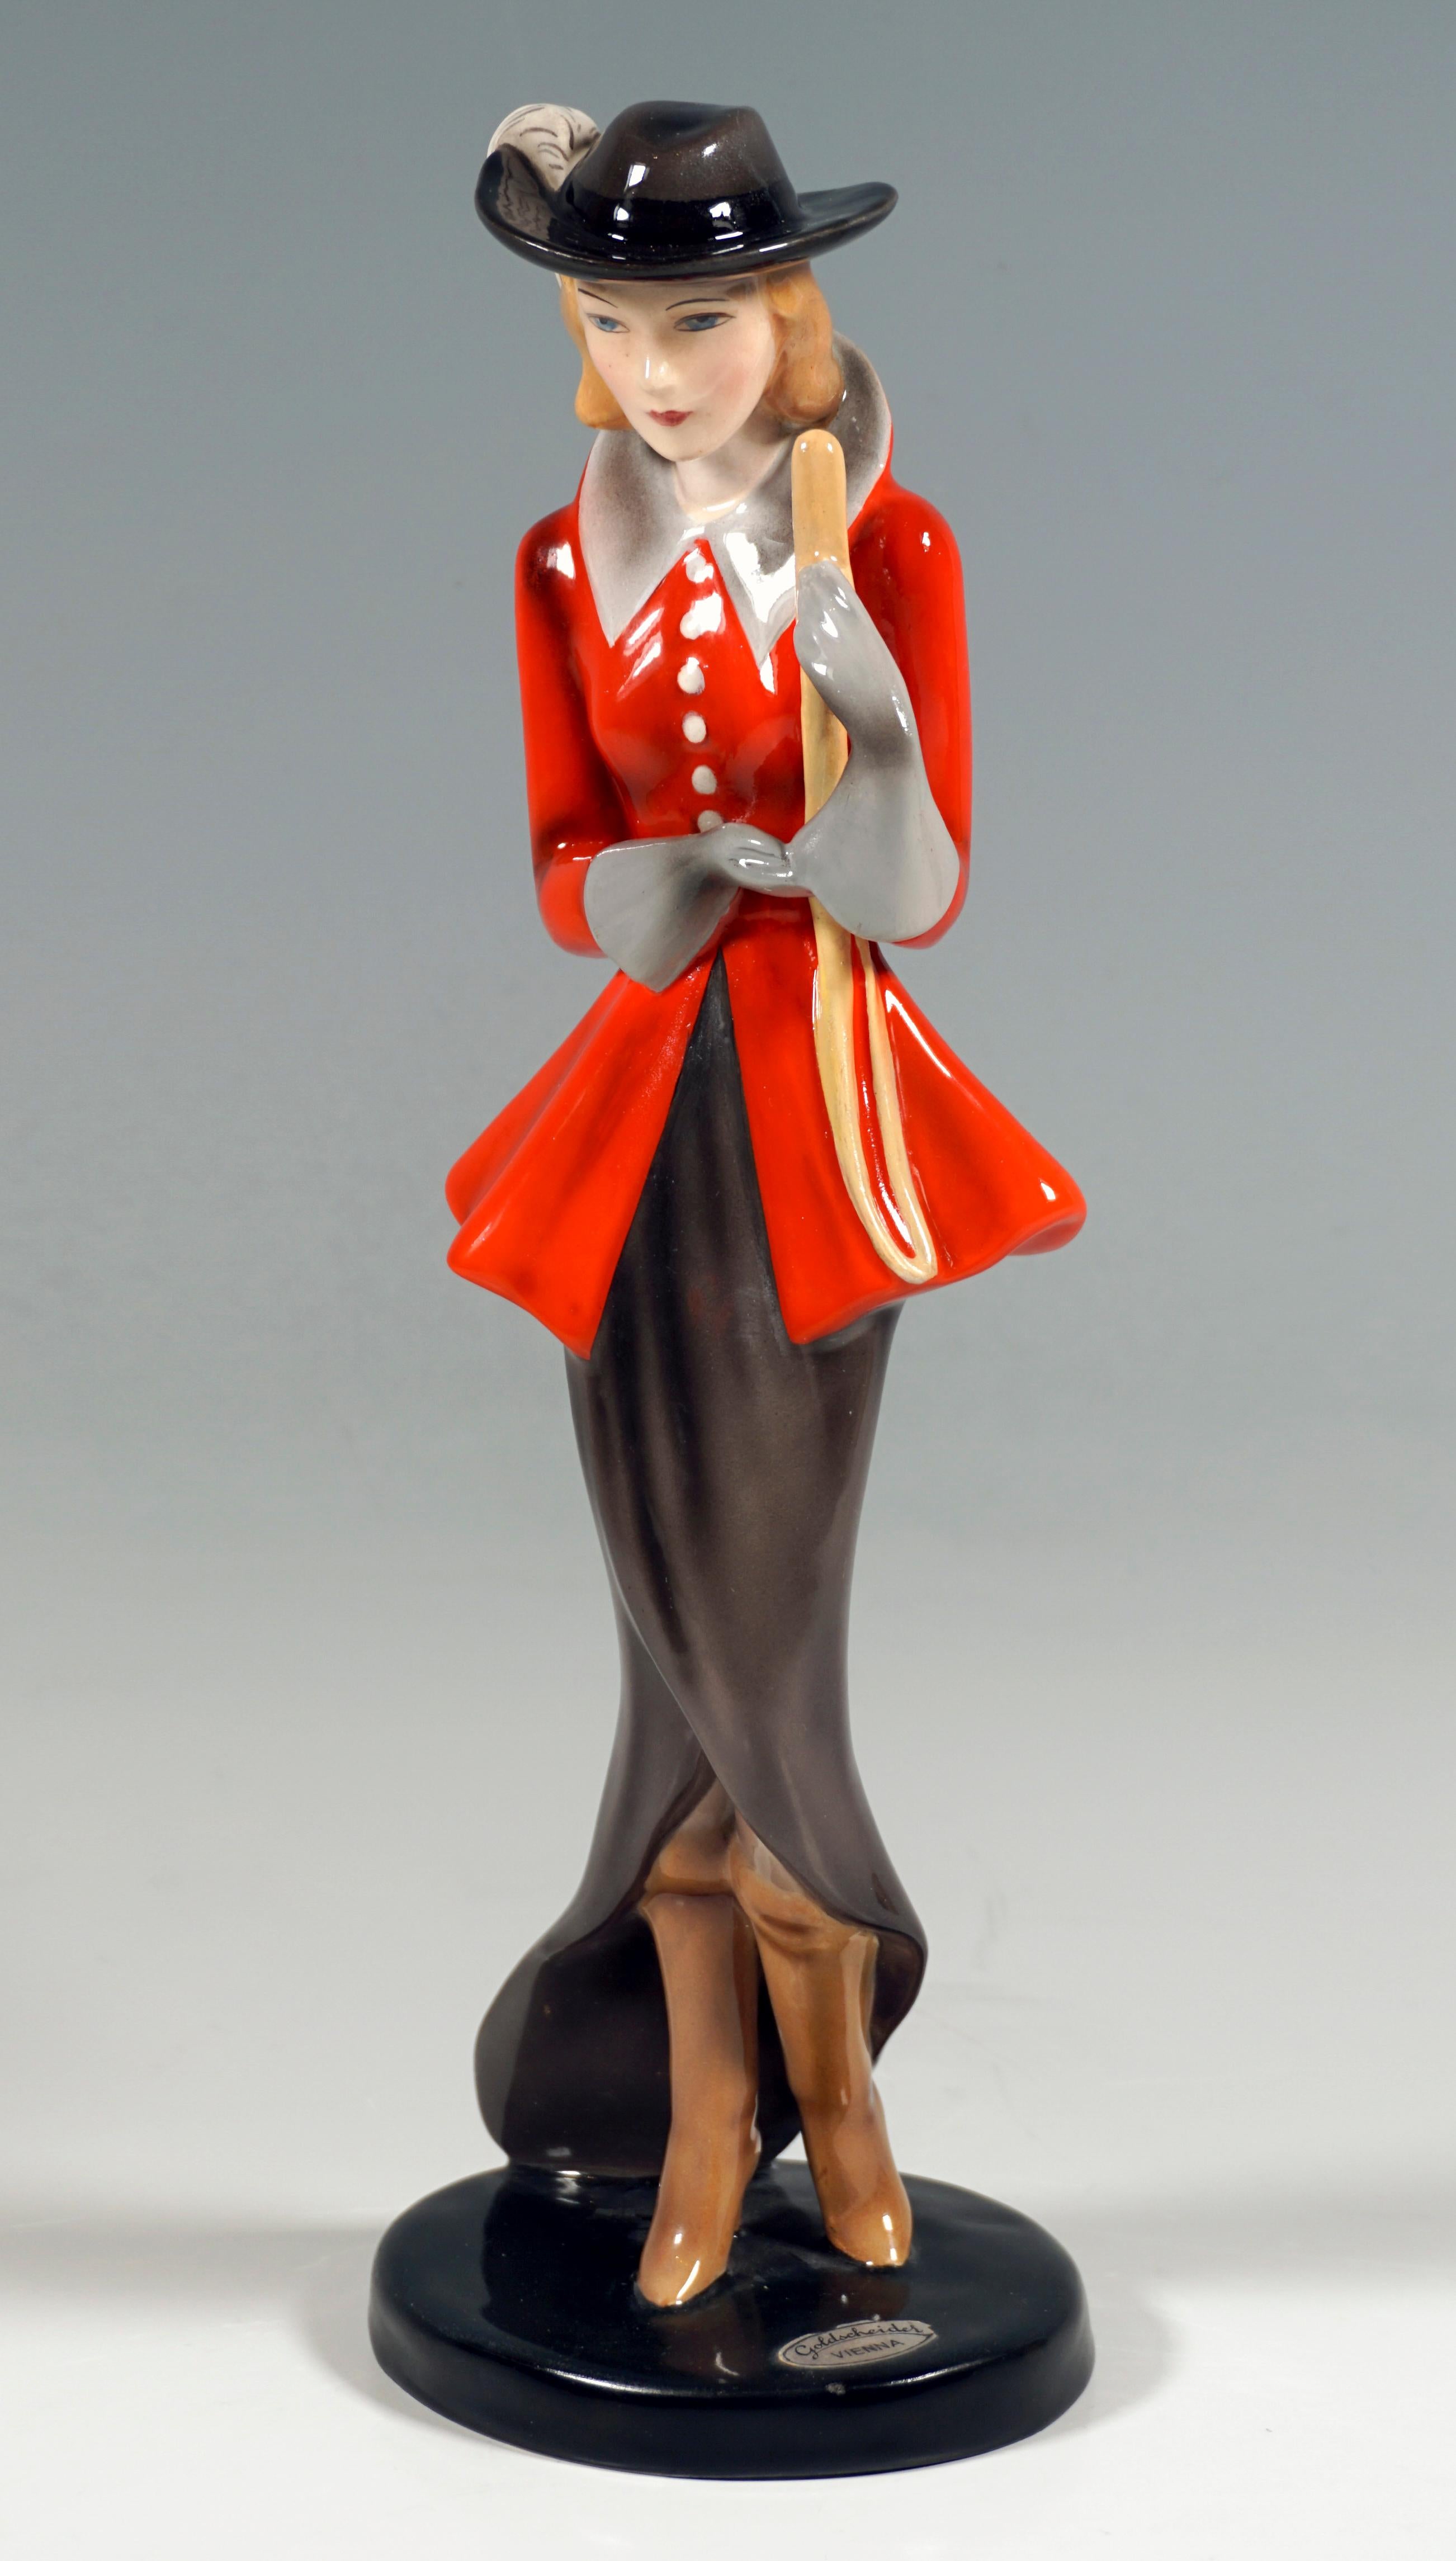 Hand-Painted Goldscheider Art Deco Figurine, Lady in Riding Costume, by Claire Weiss, ca 1937 For Sale